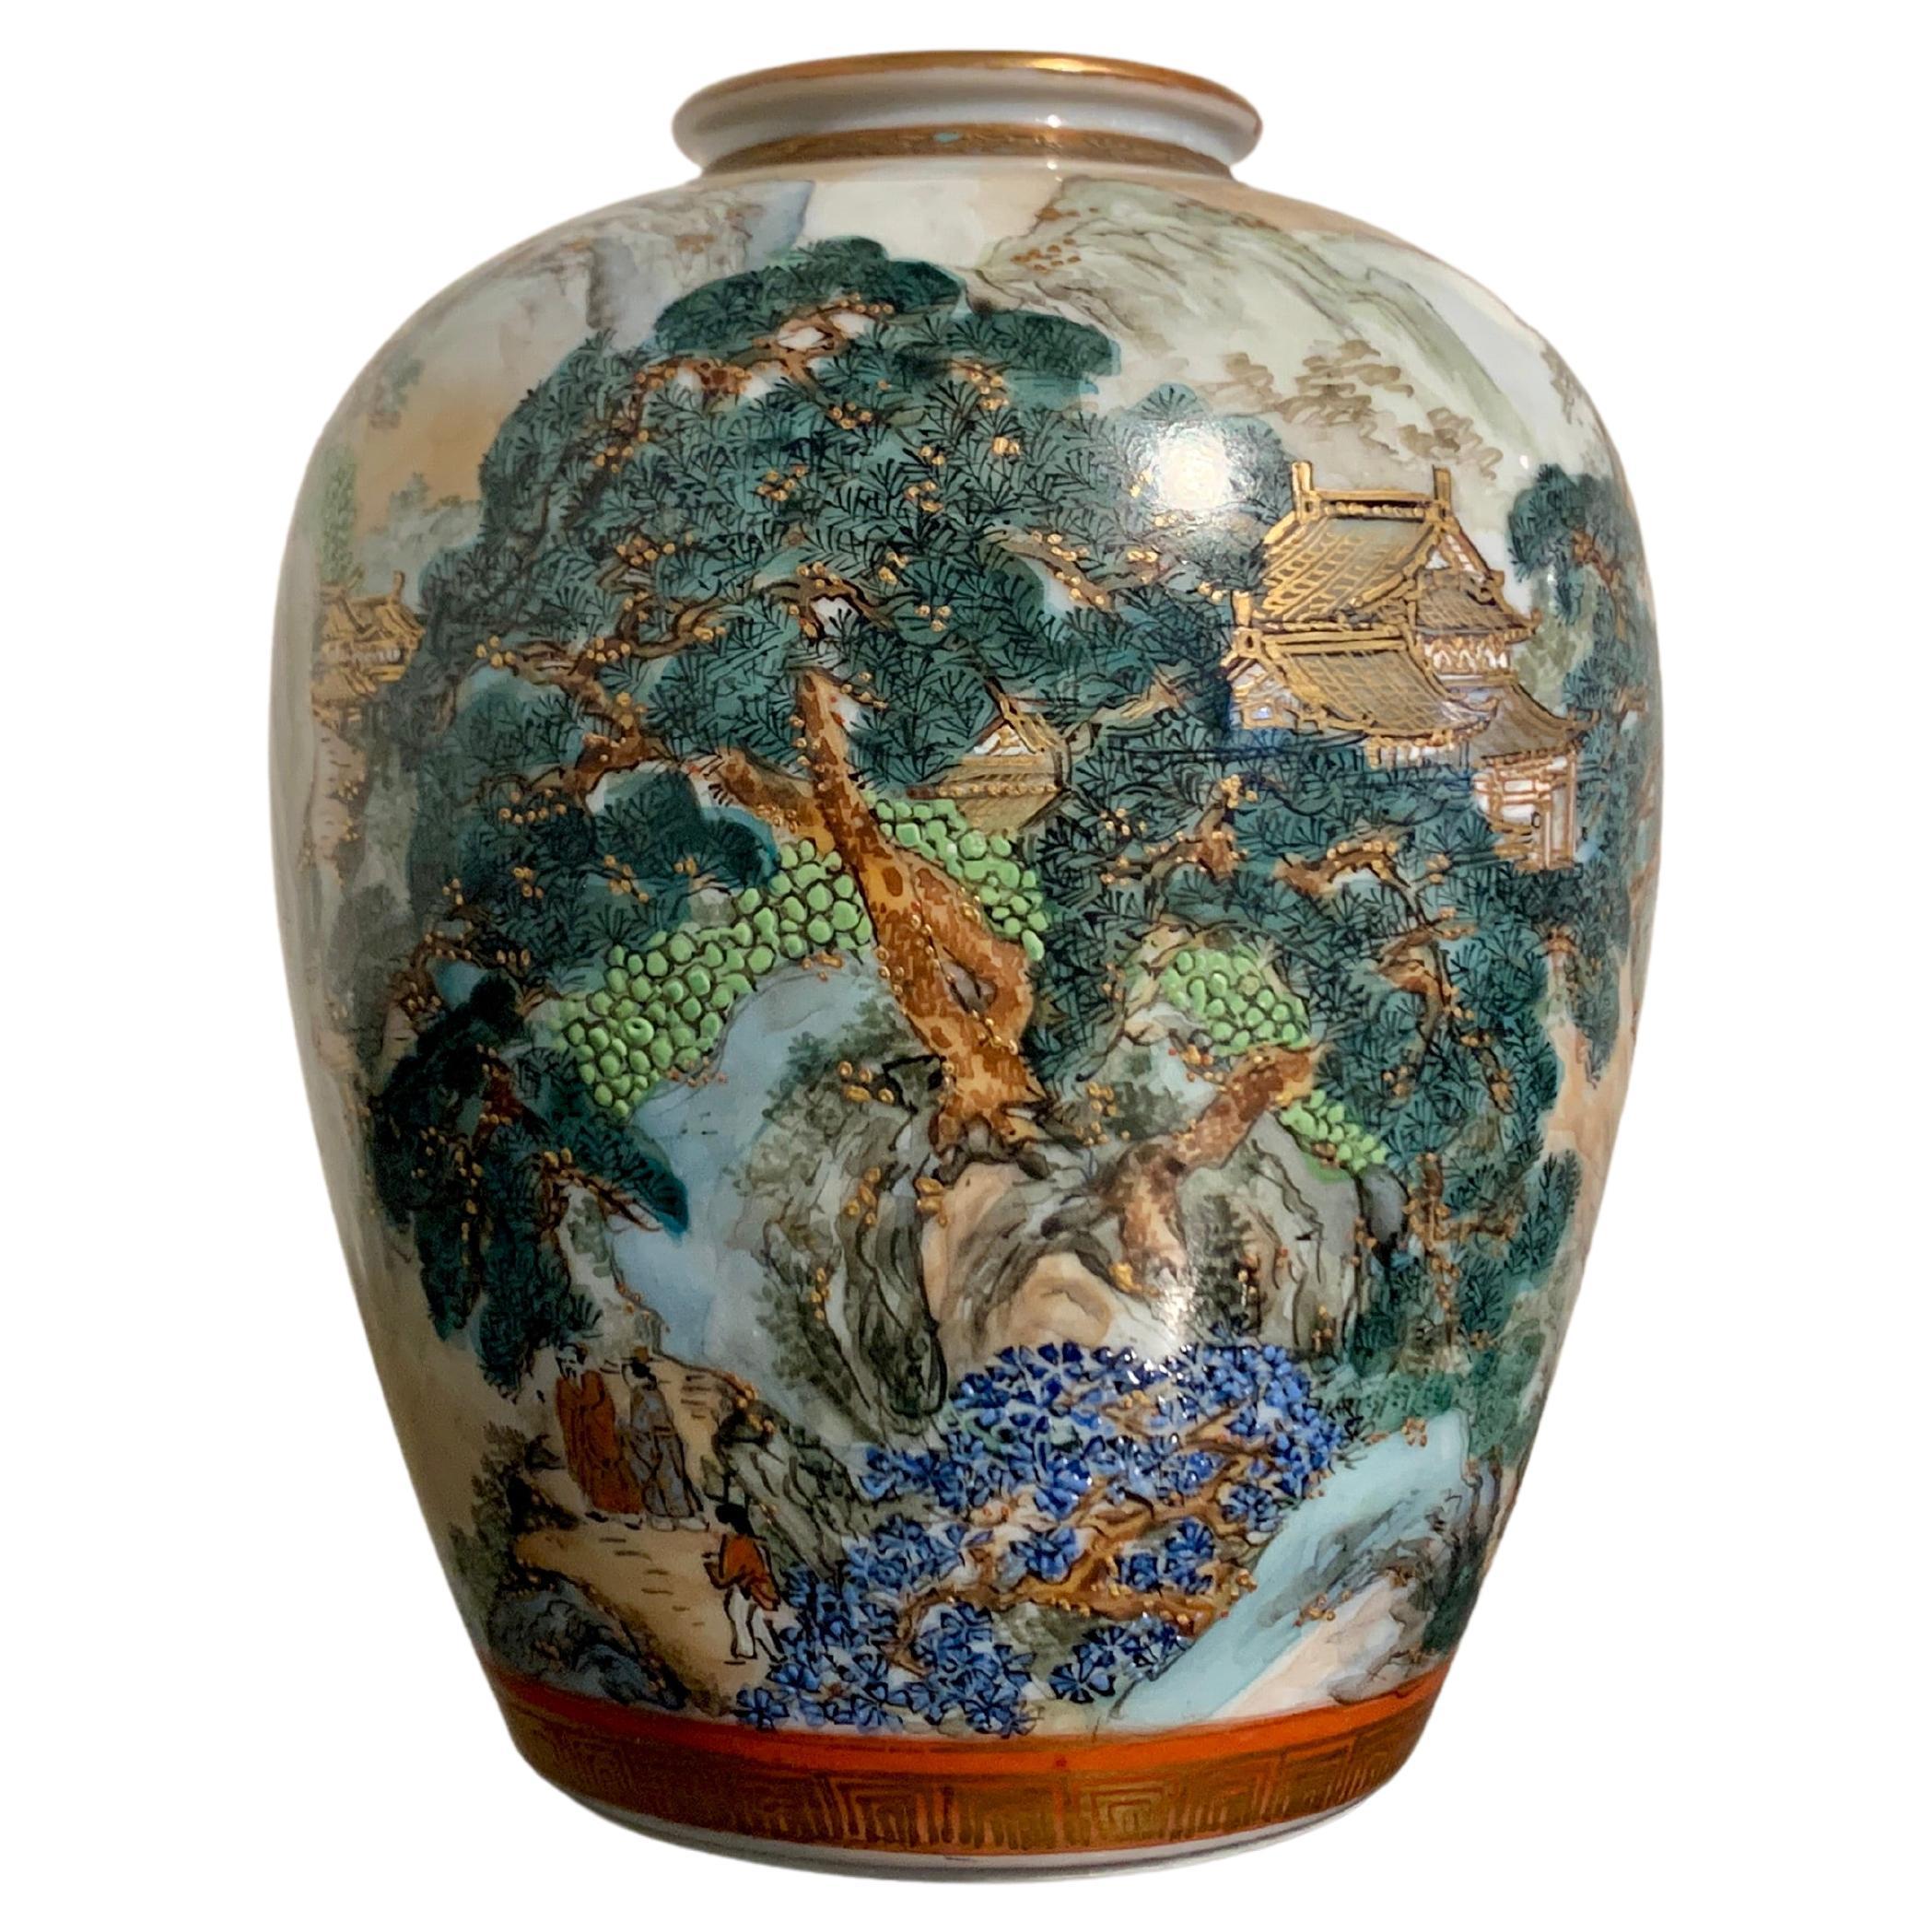 A refined and well painted Kutani porcelain vase with a mountainous landscape scene, Showa Era, circa 1930, Japan.

The elegant ovoid vase of fine, translucent porcelain, and painted all over with a continuous mountain landscape scene featuring